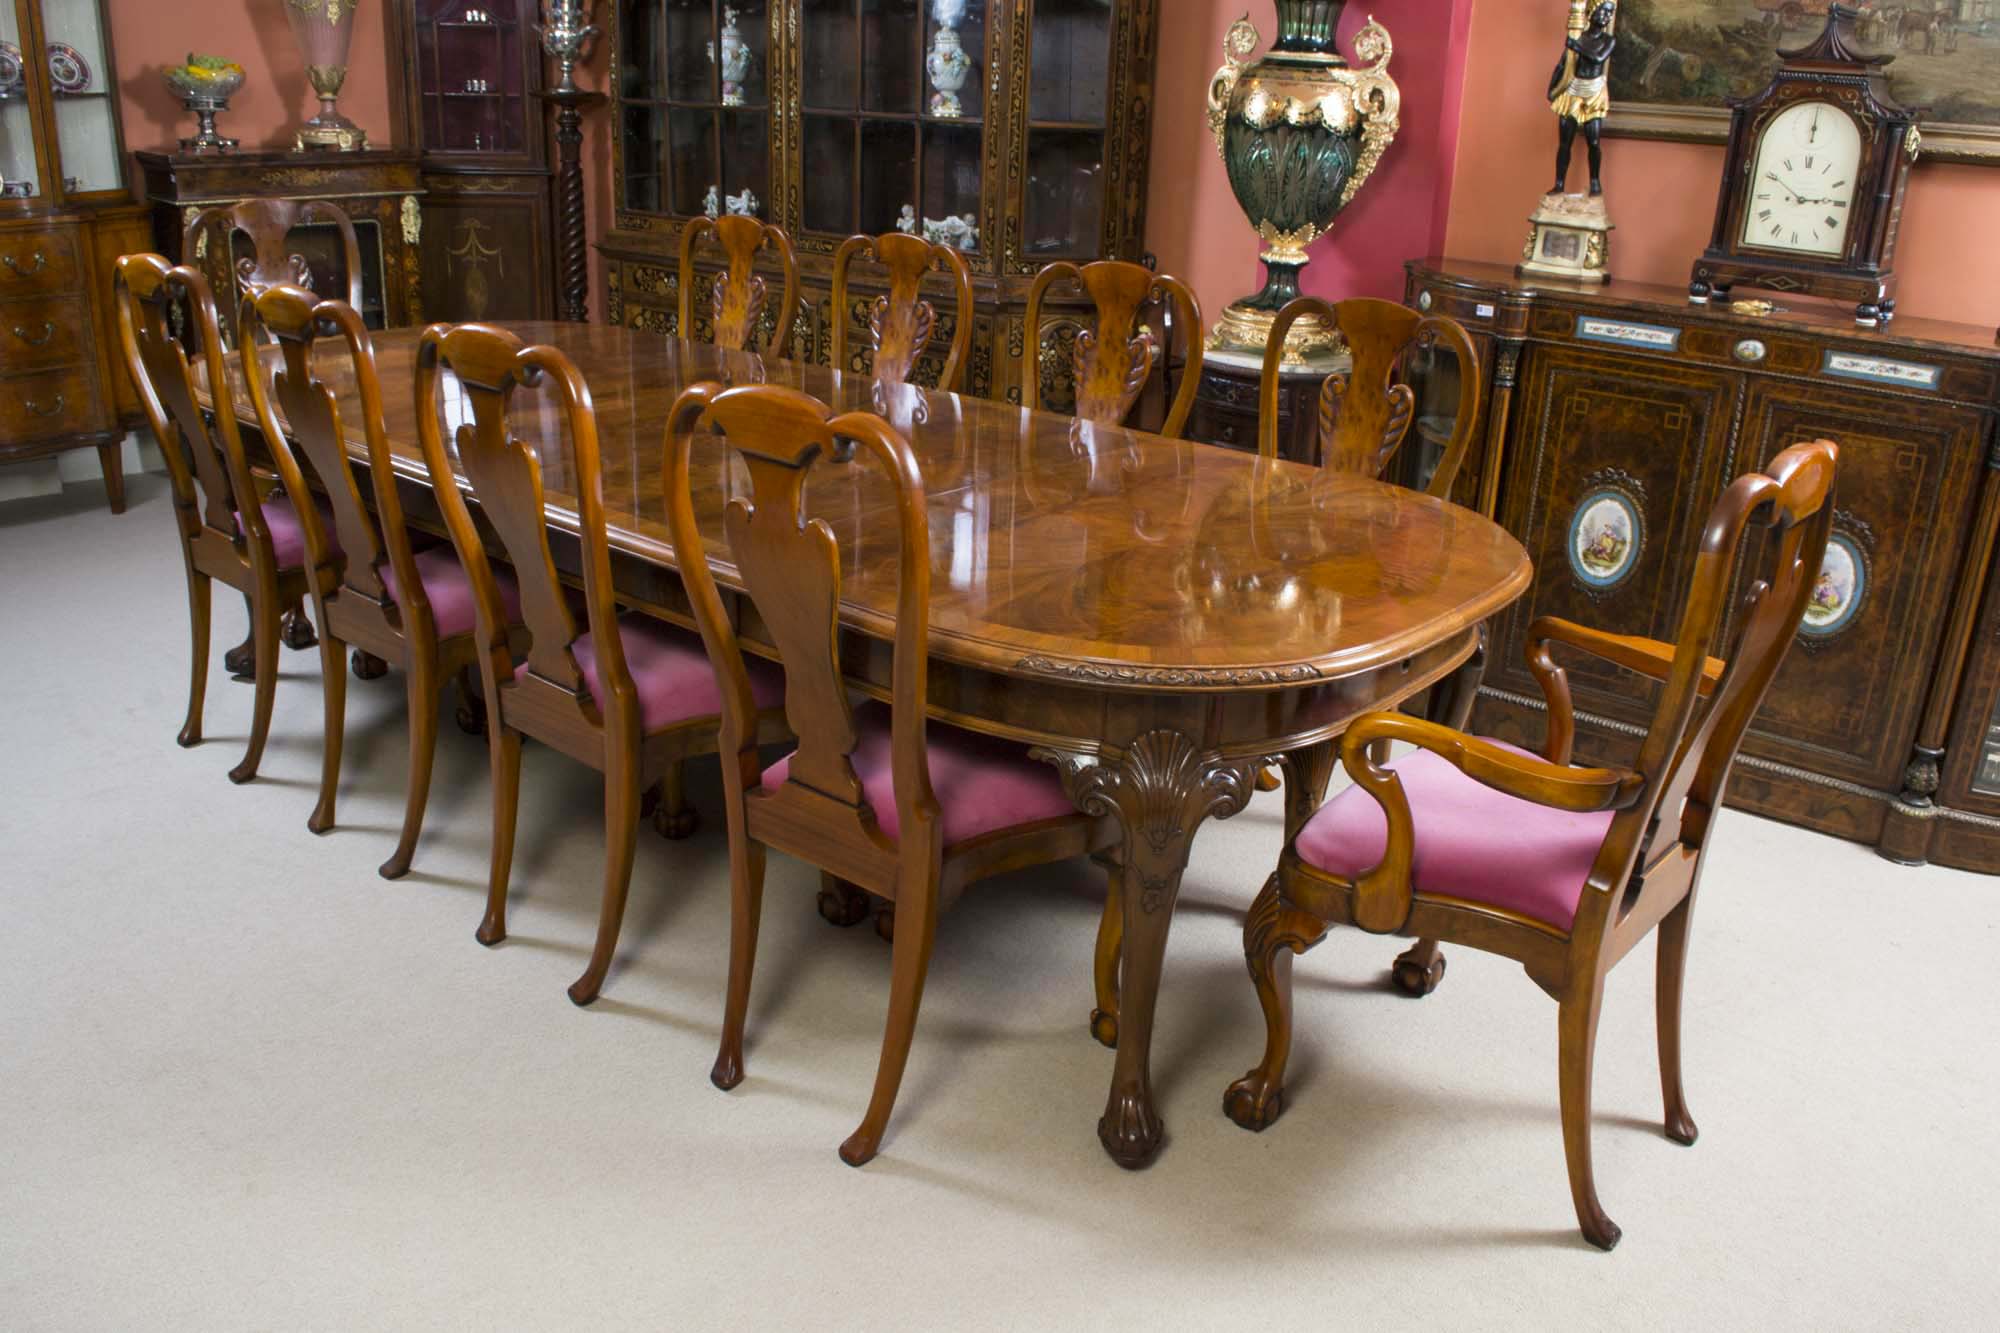 Queen Anne Dining Room Table Legs